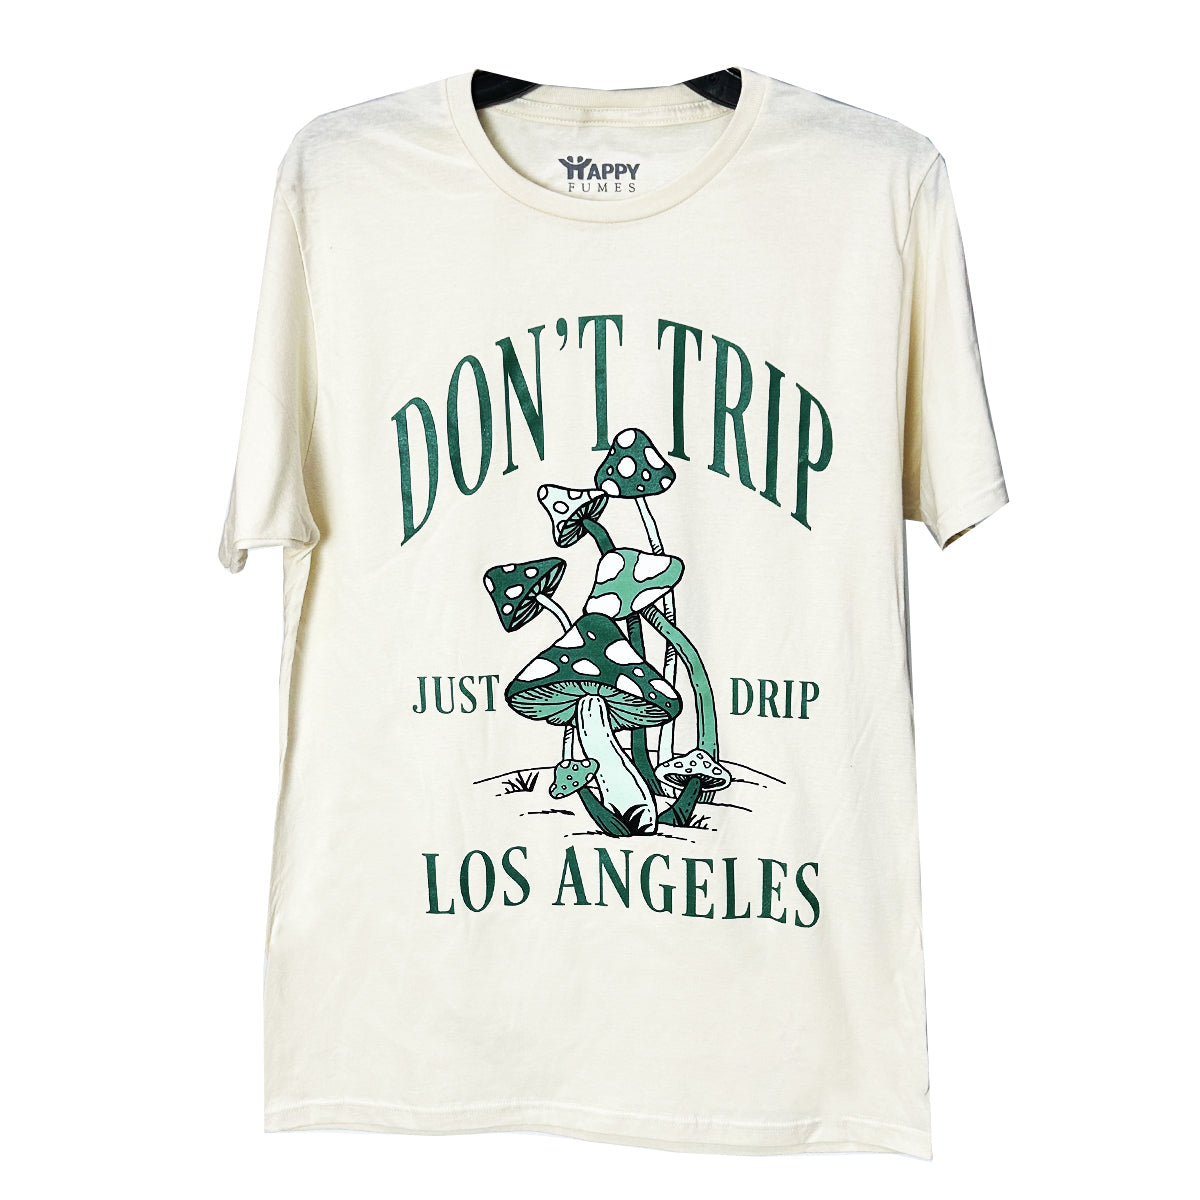 Don't Trip Short Sleeve - Pack of 6 Units  1S, 2M, 2L, 1XL